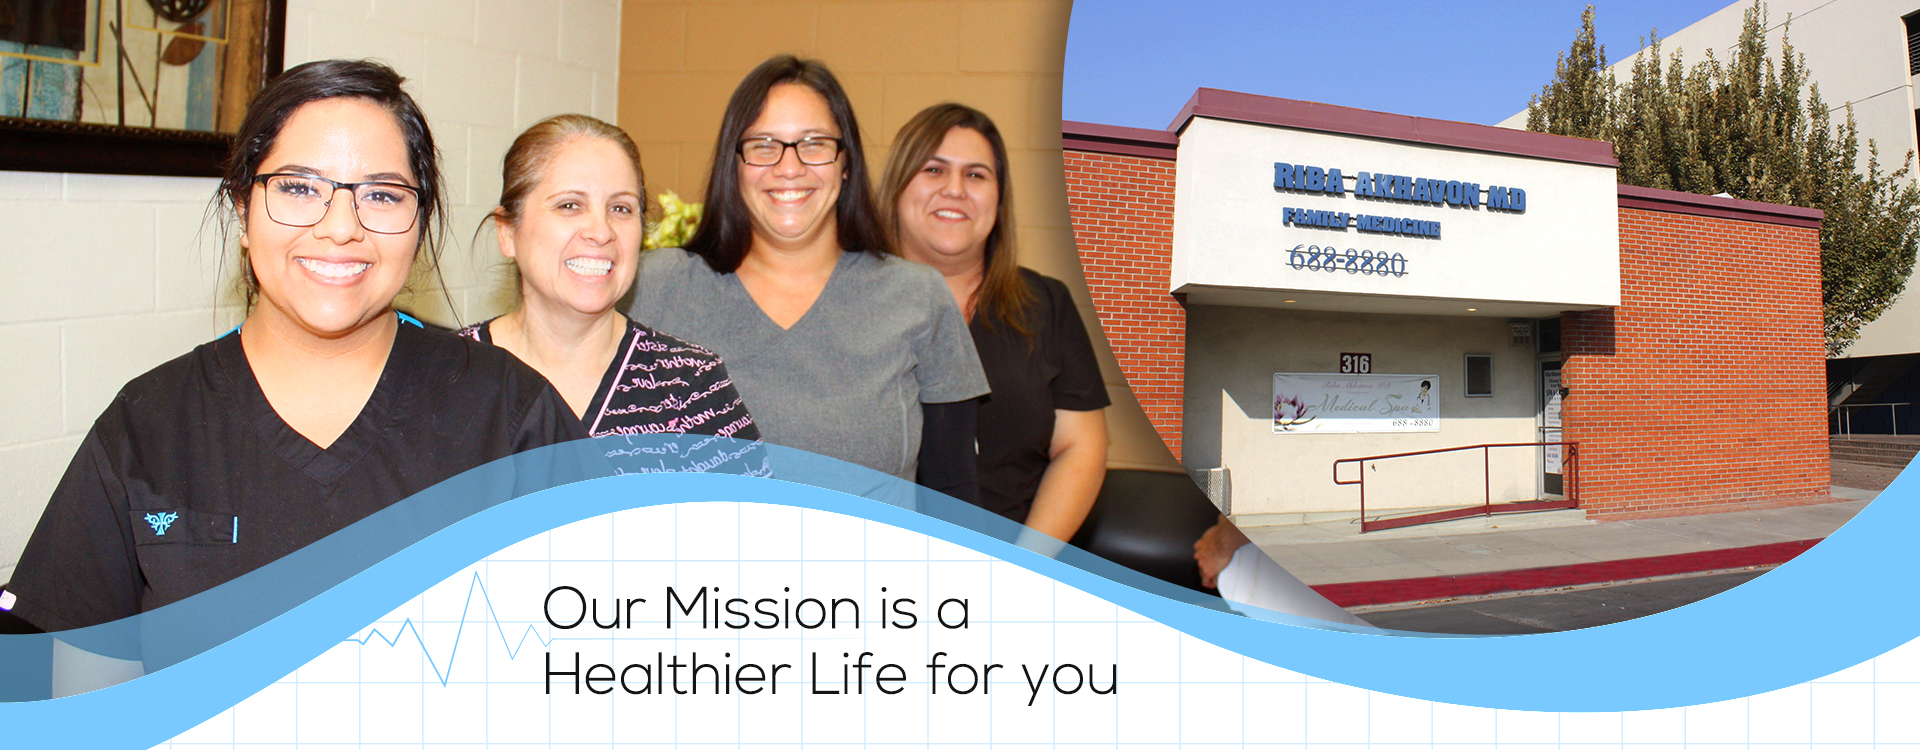 Our Mission is a Healthier Life for you